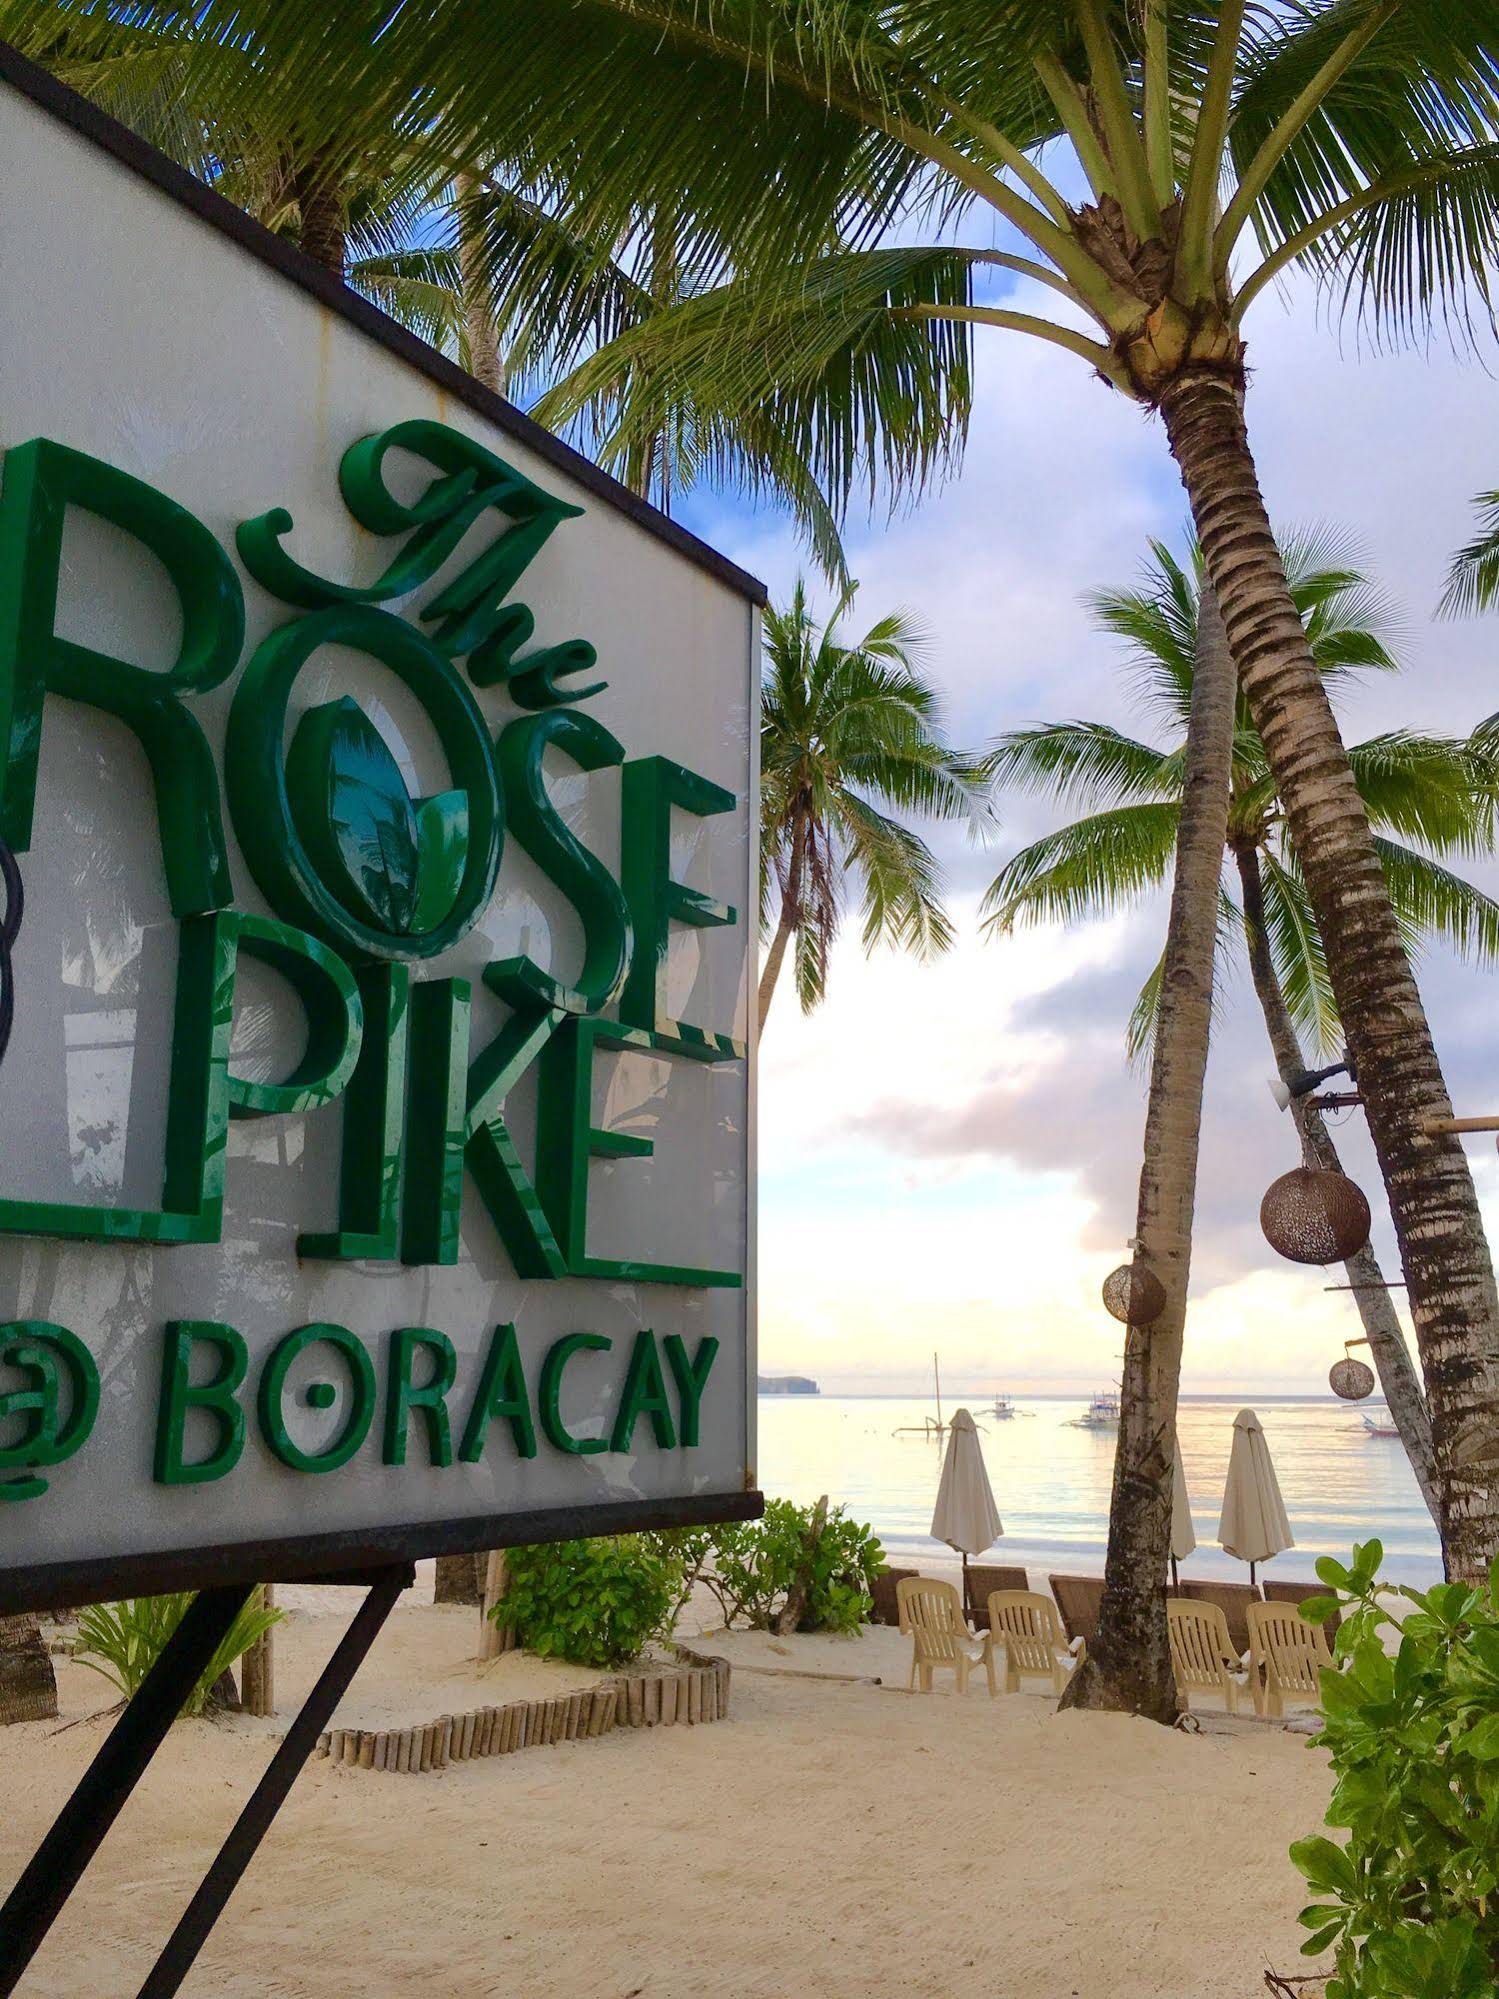 The Rose Pike at Boracay